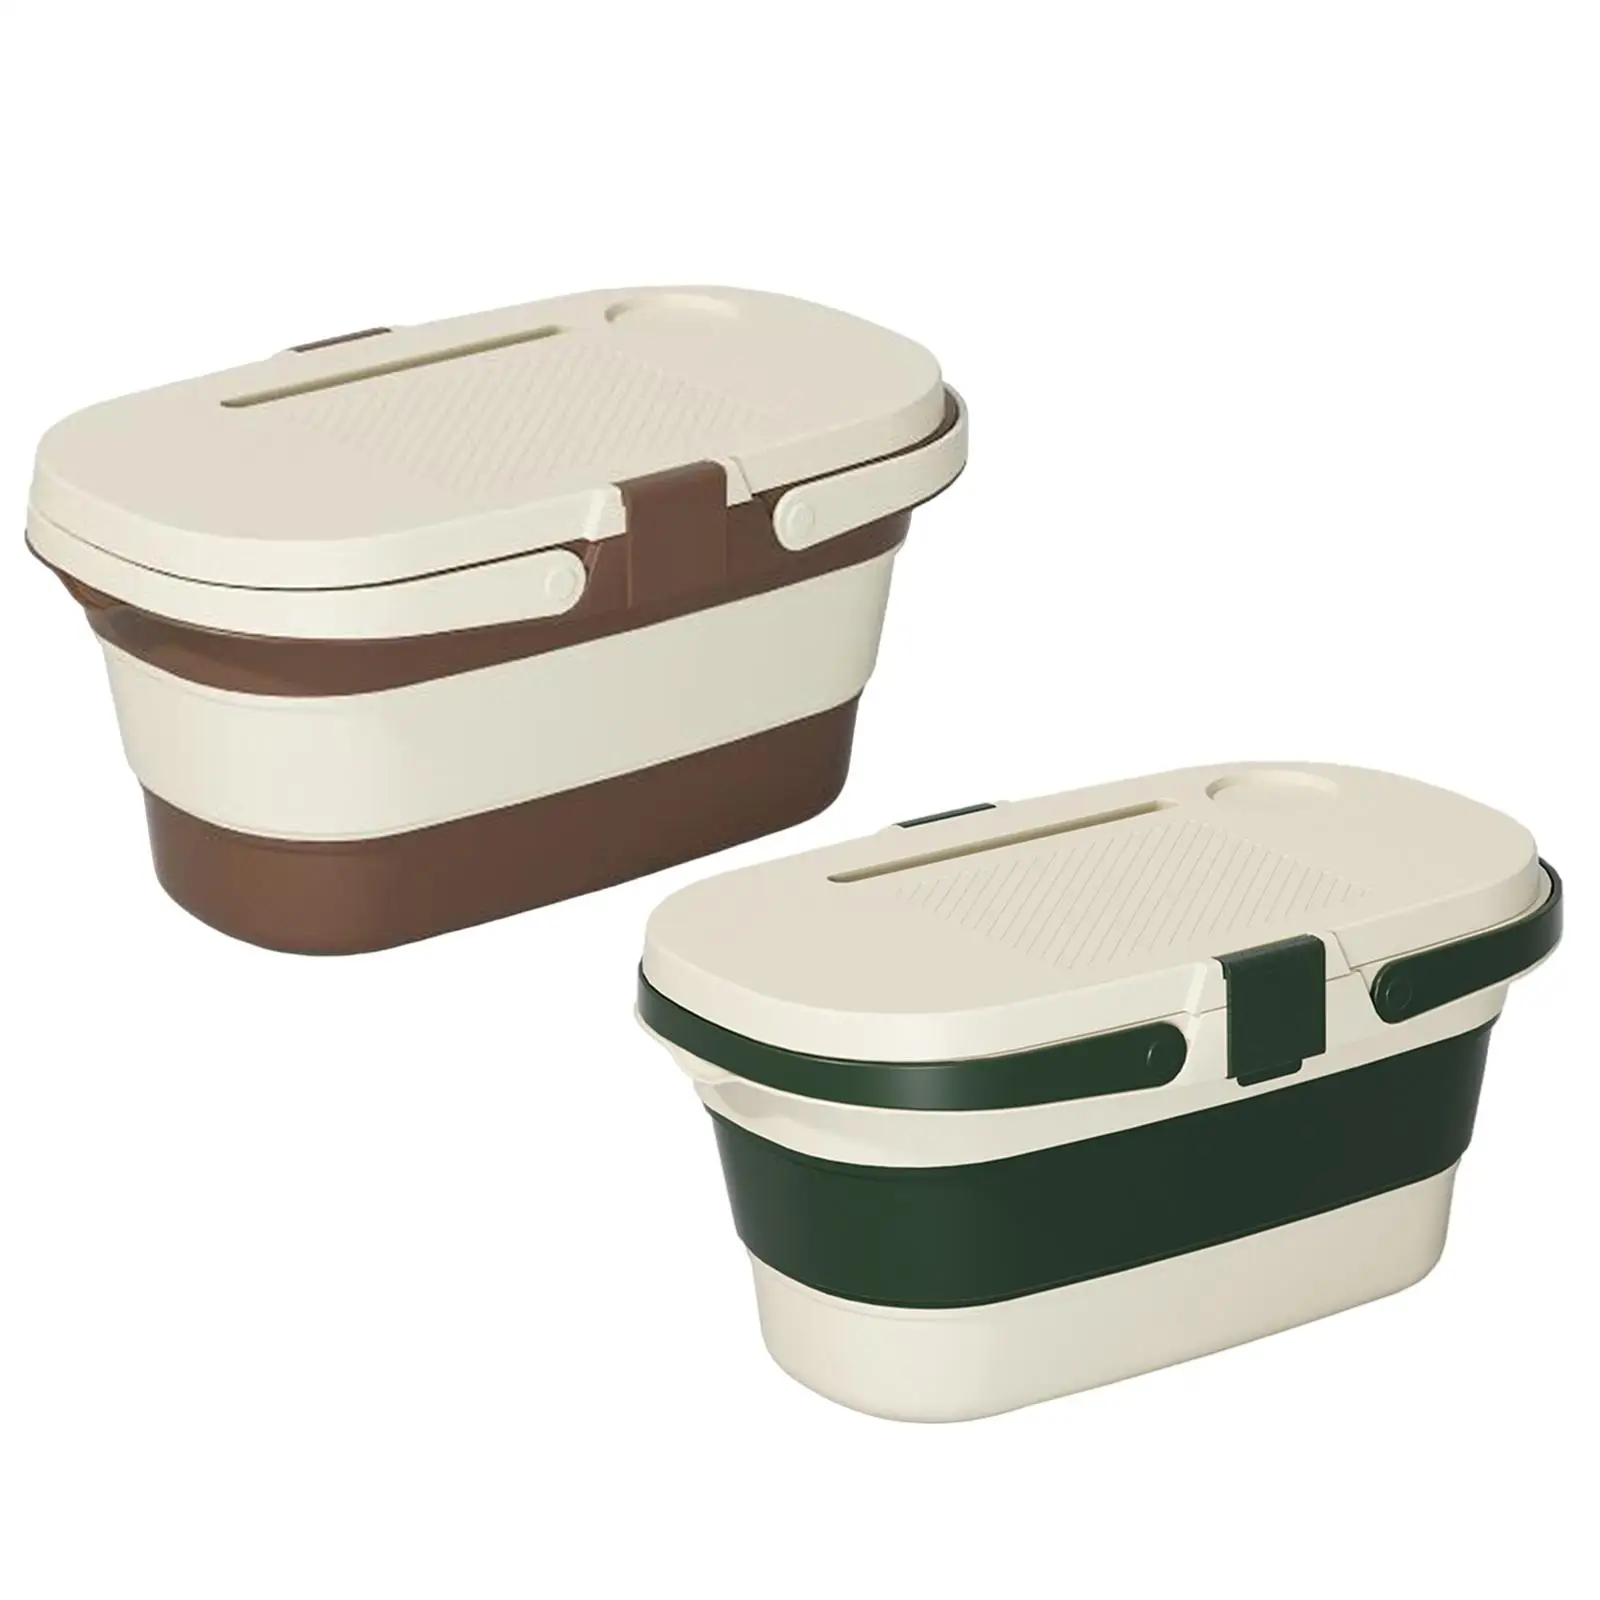 Collapsible Picnic Basket Multifunctional Water Bucket Storage Box with Lid and